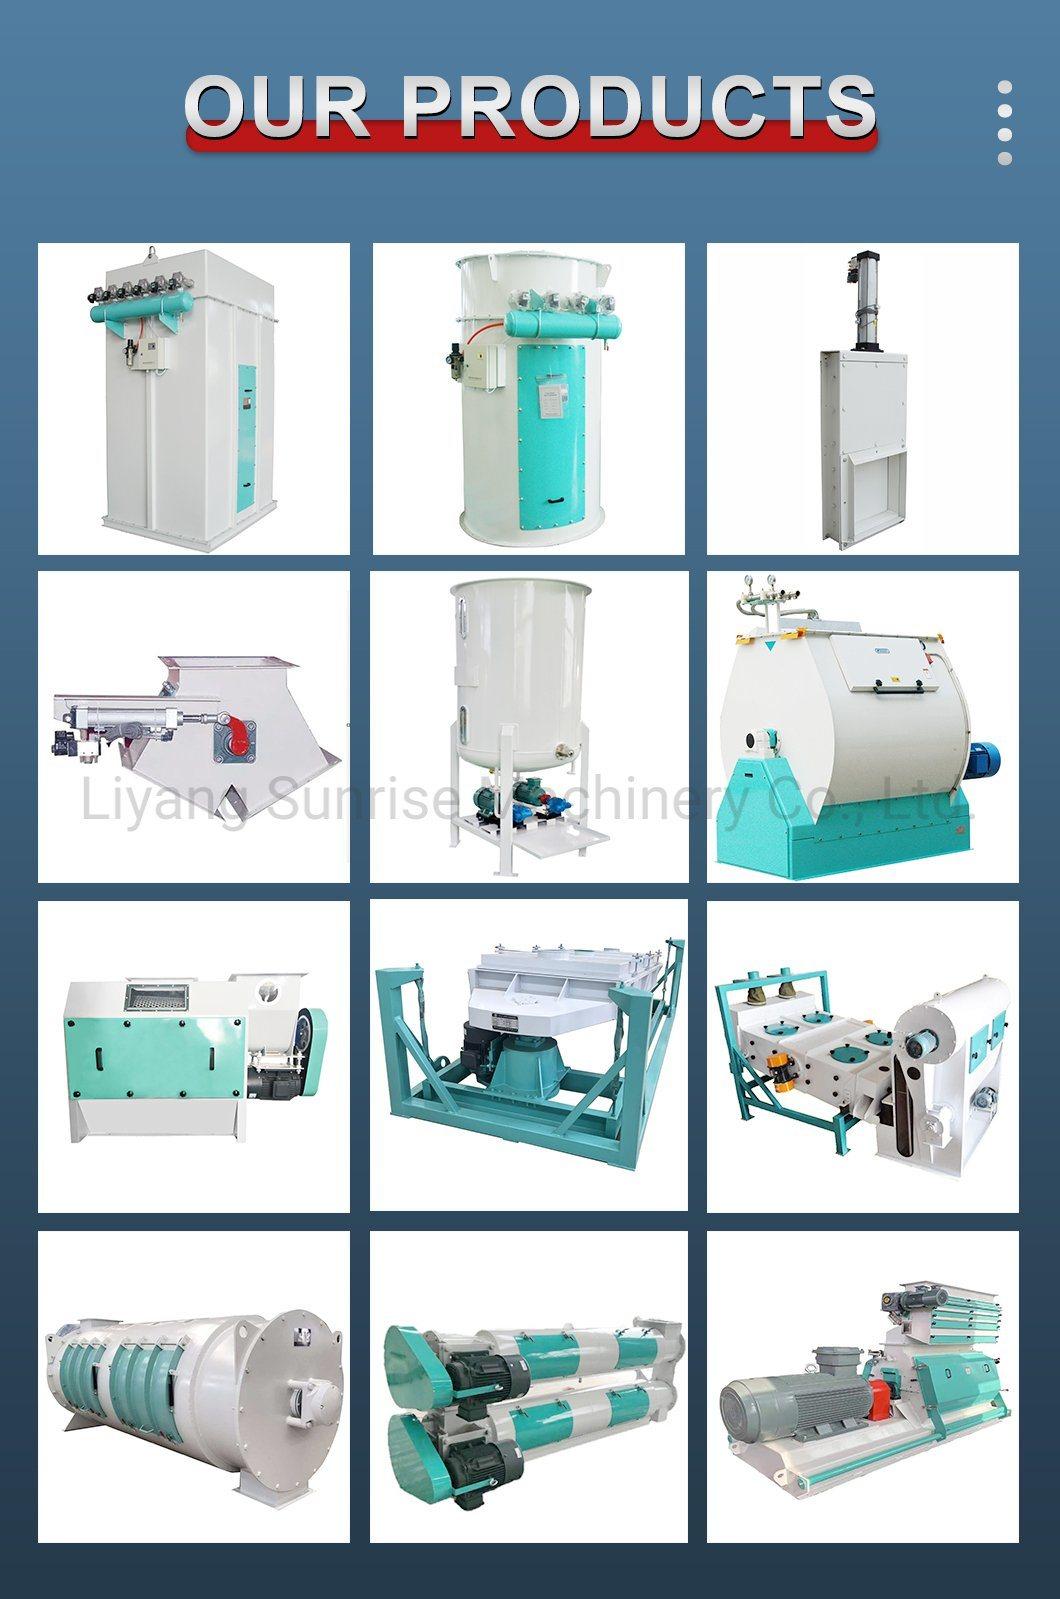 High Efficiency Dedusting Equipment for Grain, Food, Feed and Other Industries